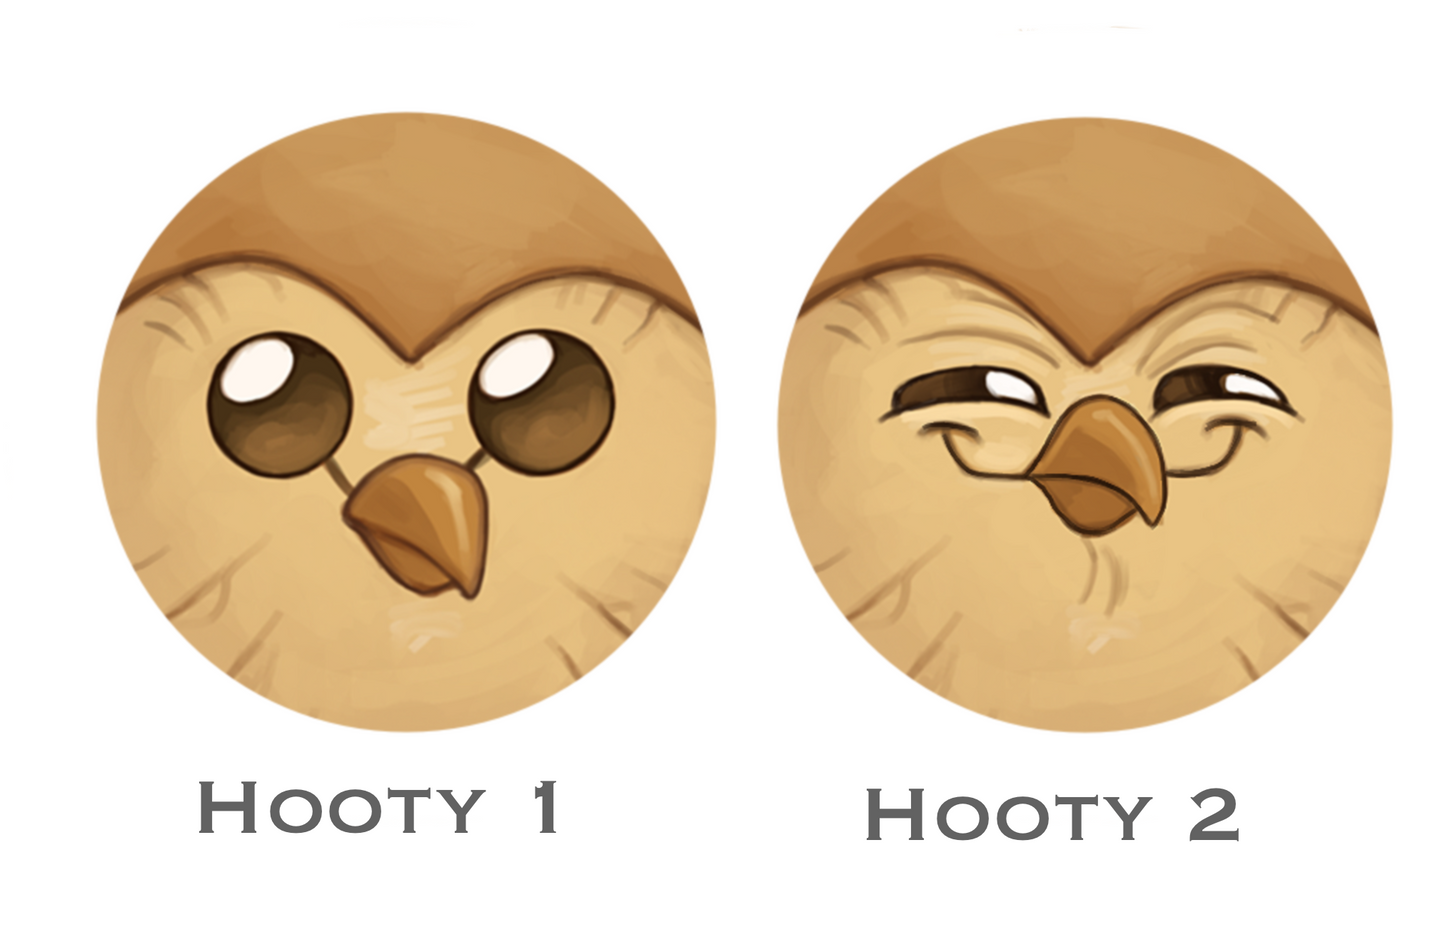 Hooty buttons